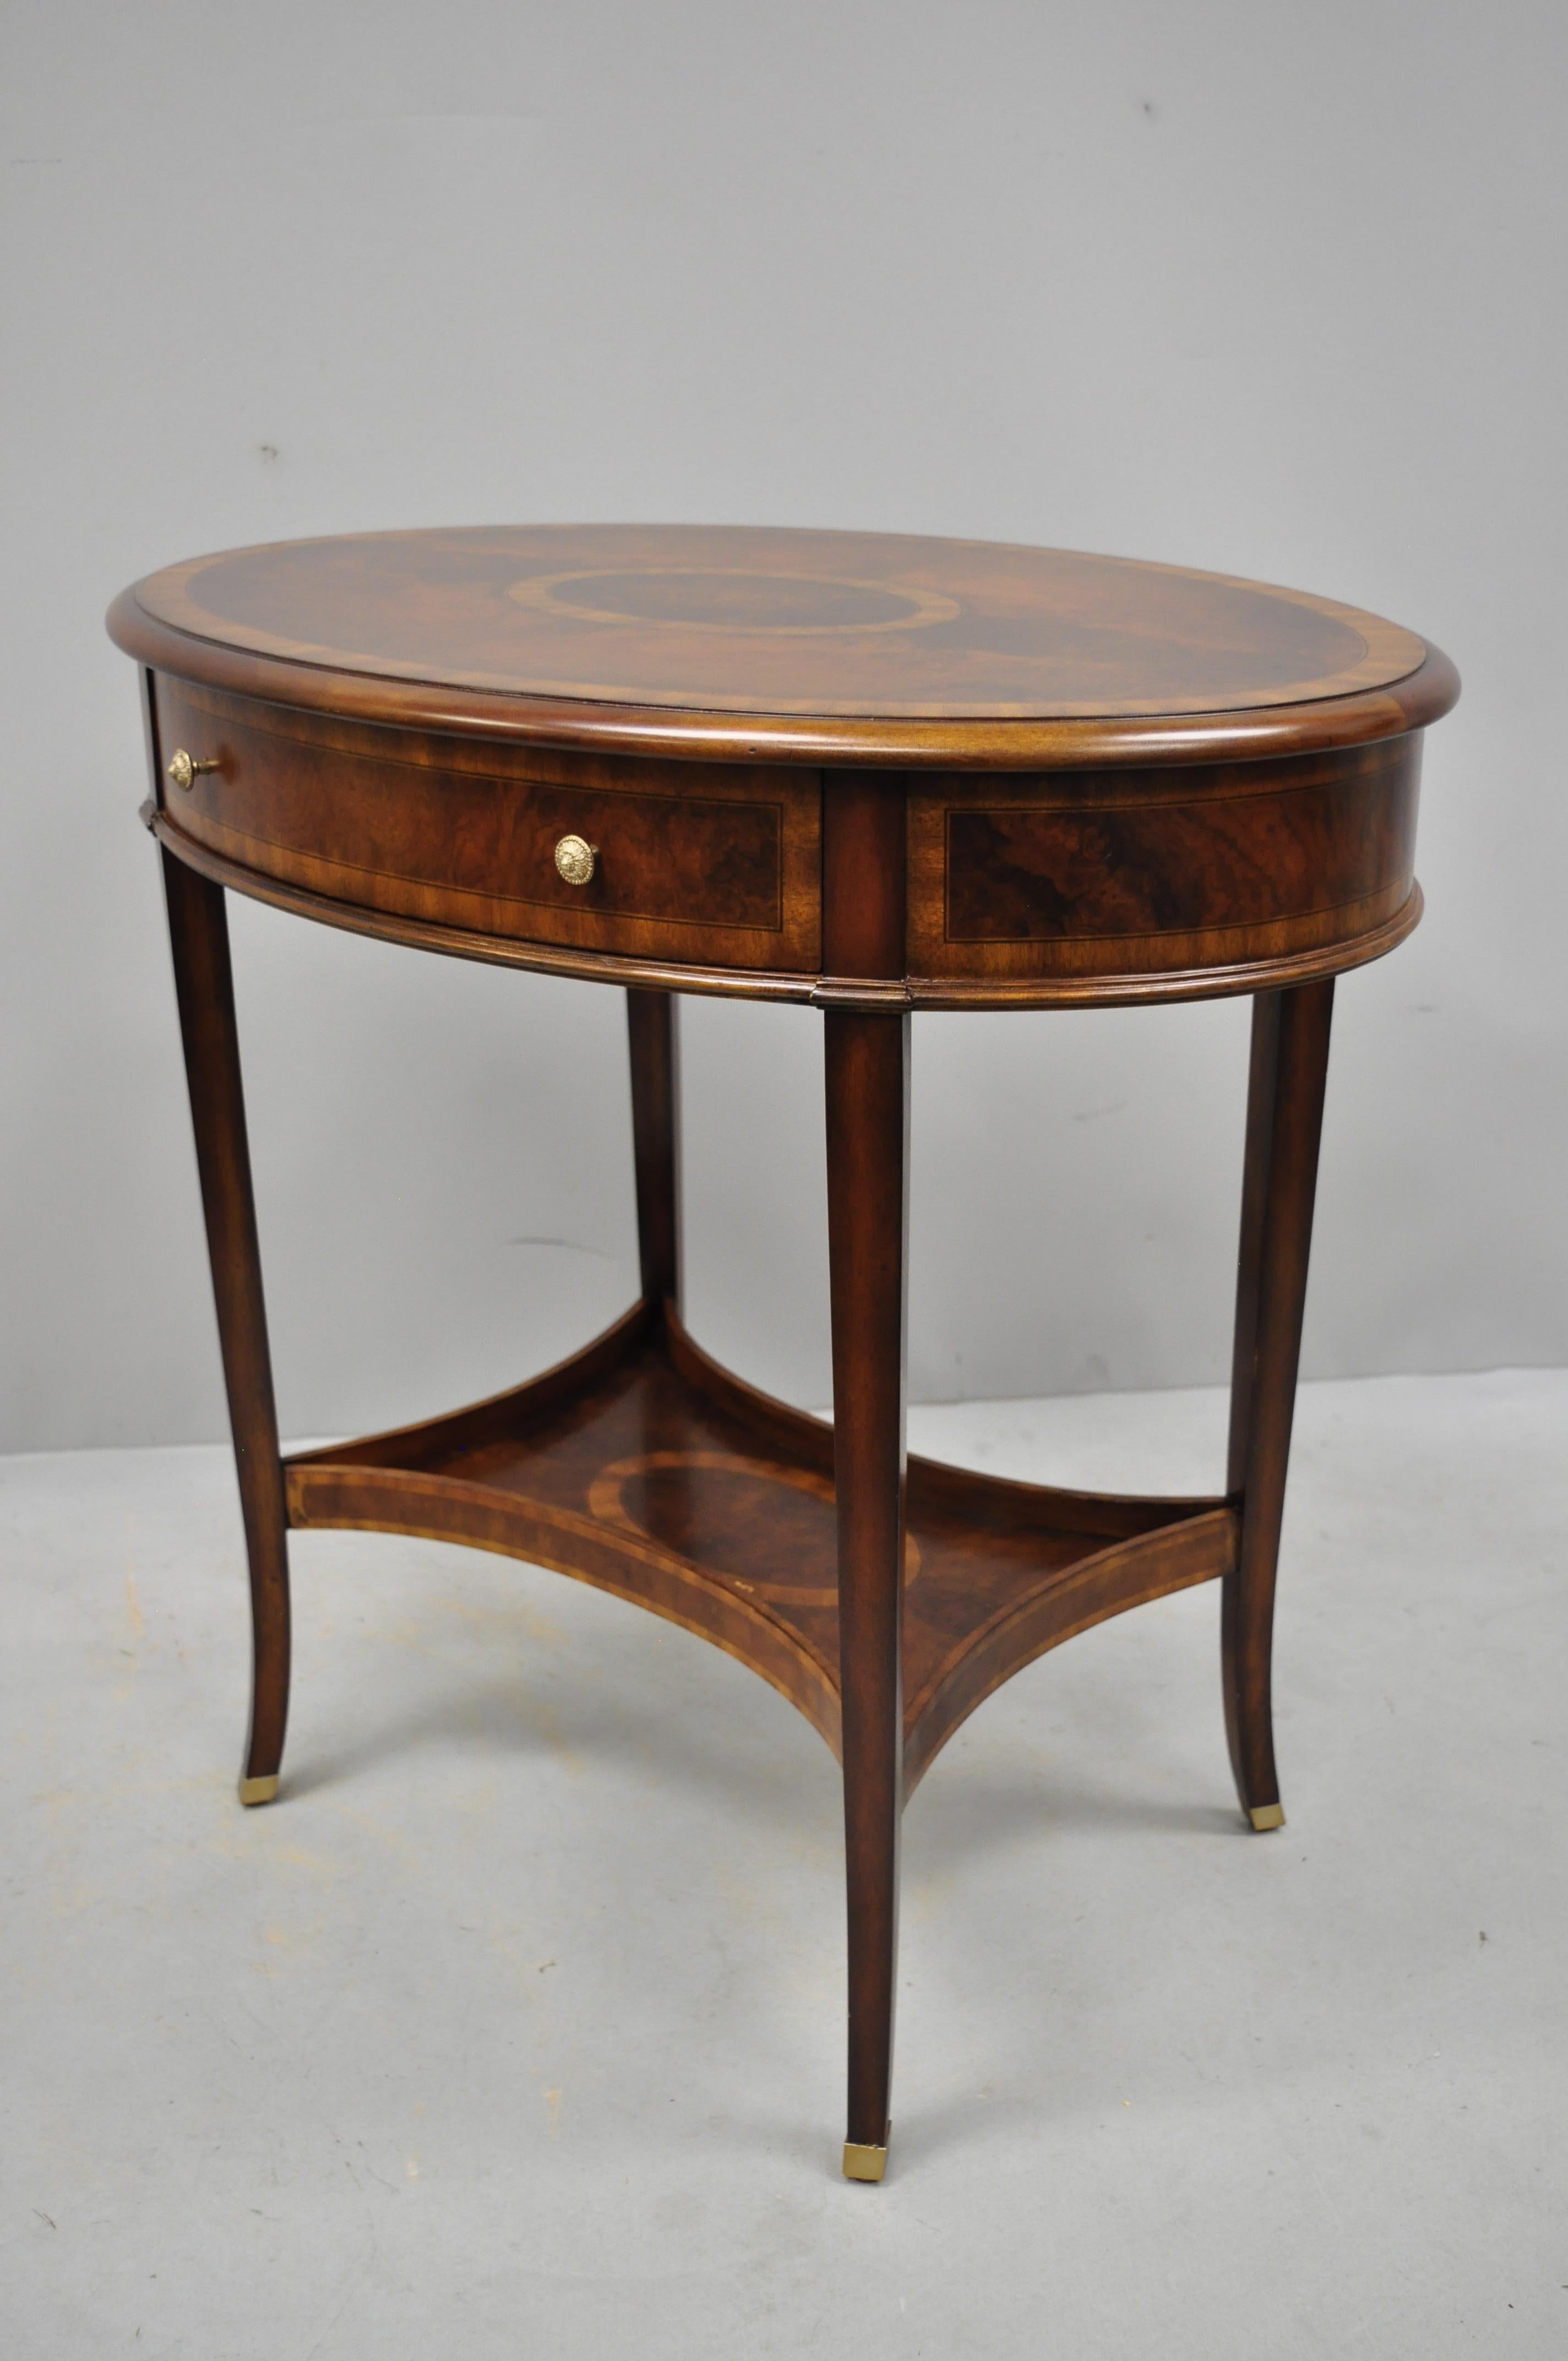 Maitland Smith mahogany oval inlaid one drawer occasional accent side table. Item features beautiful wood grain, original label, 1 drawer, tapered legs, nice inlay, great style and form, circa 20th-21st century. Measurements: 28